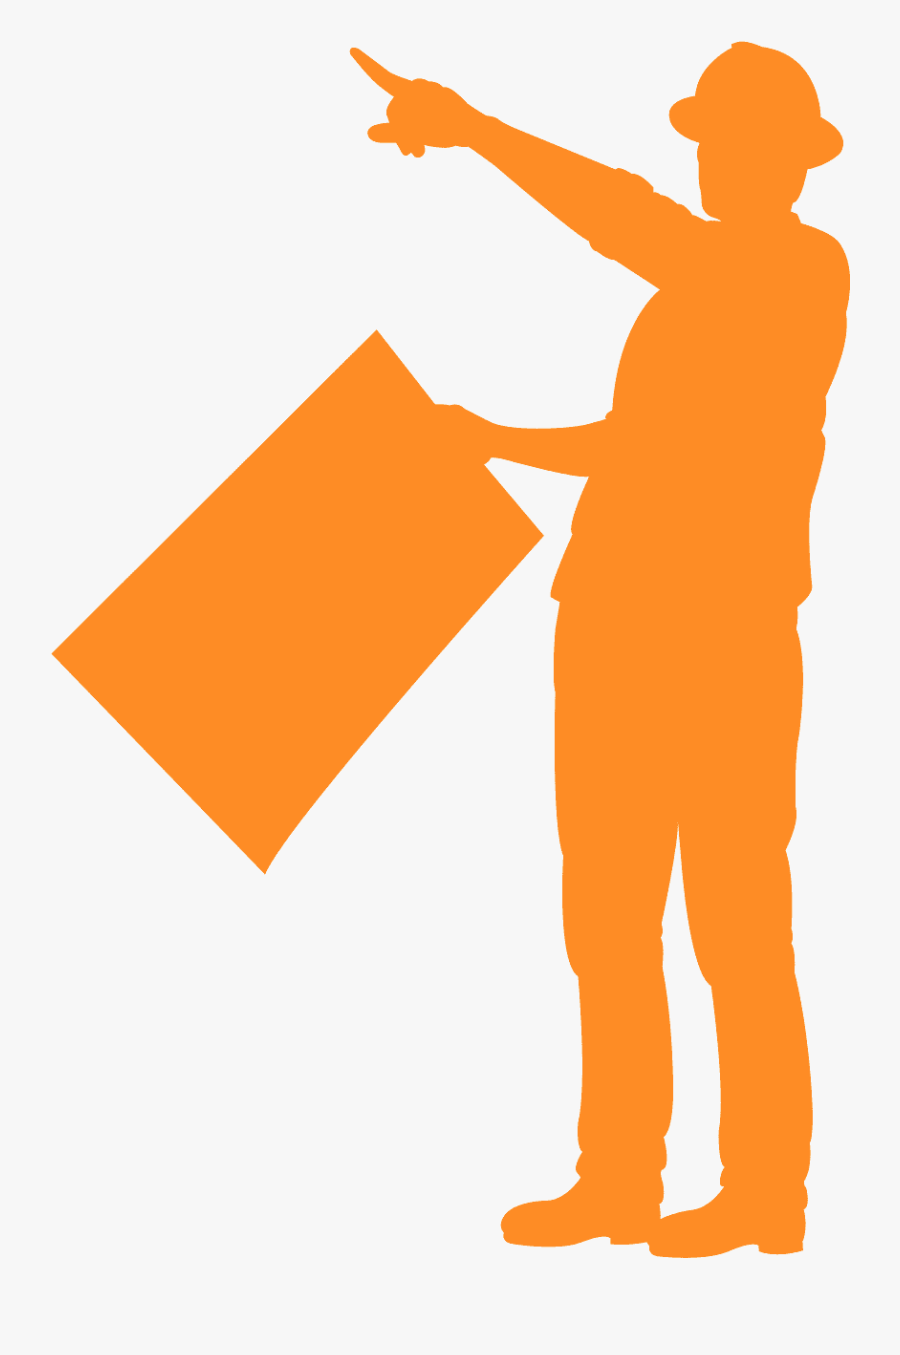 Engineer Silhouette Png, Transparent Clipart